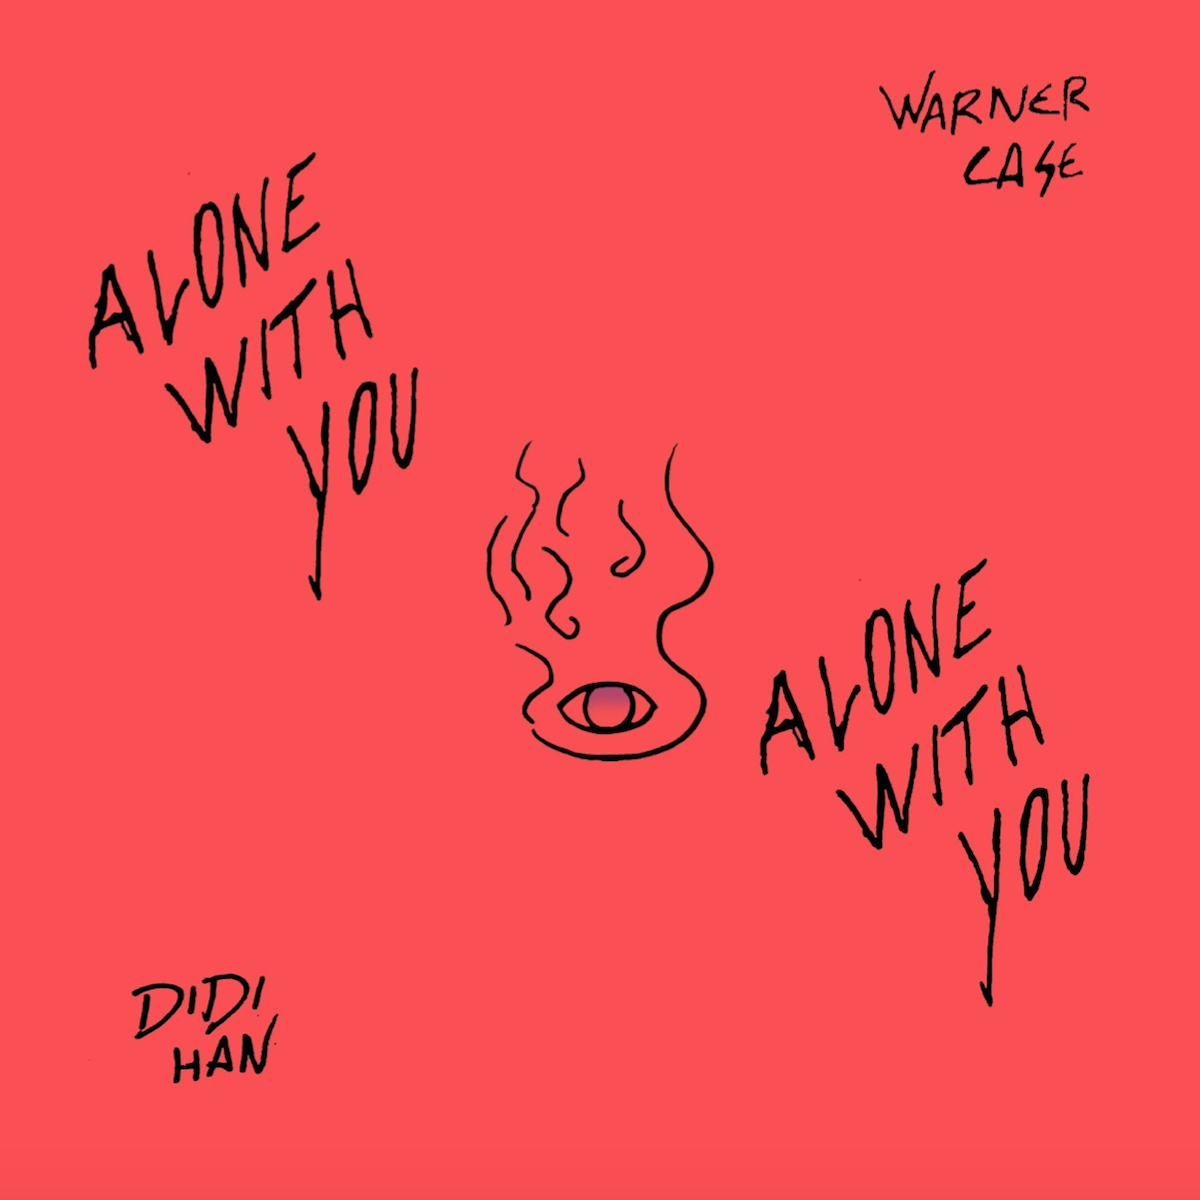 Warner Case feat. Didi Han Alone With You